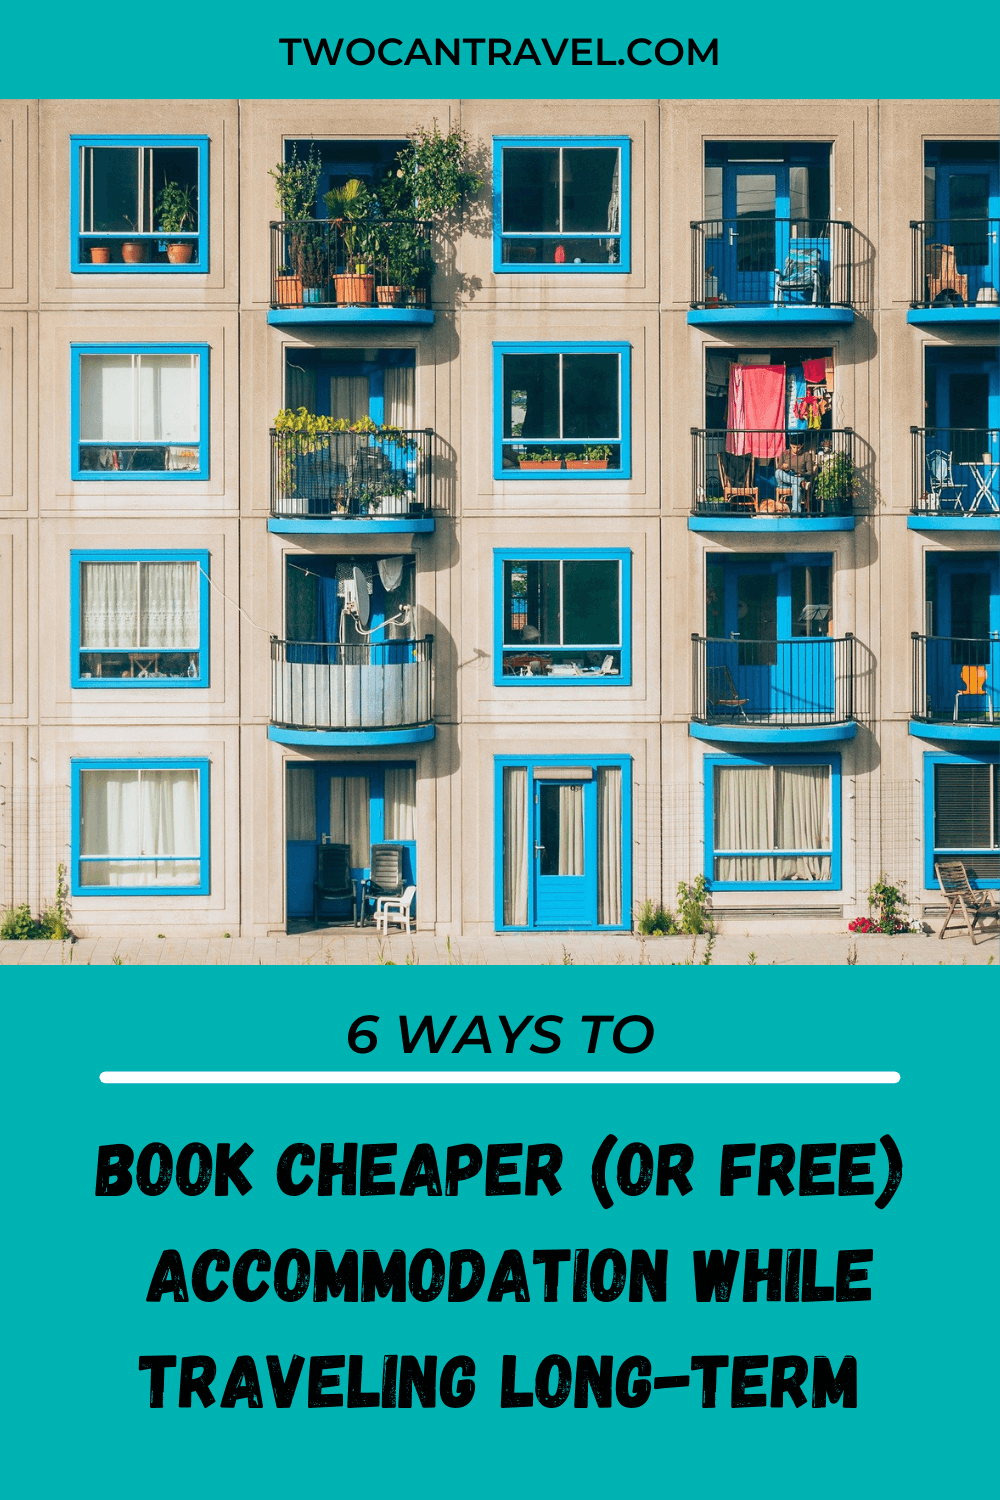 Text: Six ways to Book Cheaper (or free) accommodation While Traveling long-term. Slow travel. Two Can Travel dot com Image is of the side of an apartment building with windows and balconies. The trim of the windows and balcony doors are blue, the building is a tan color. There are plants on some of the balconies and laundry hanging. 